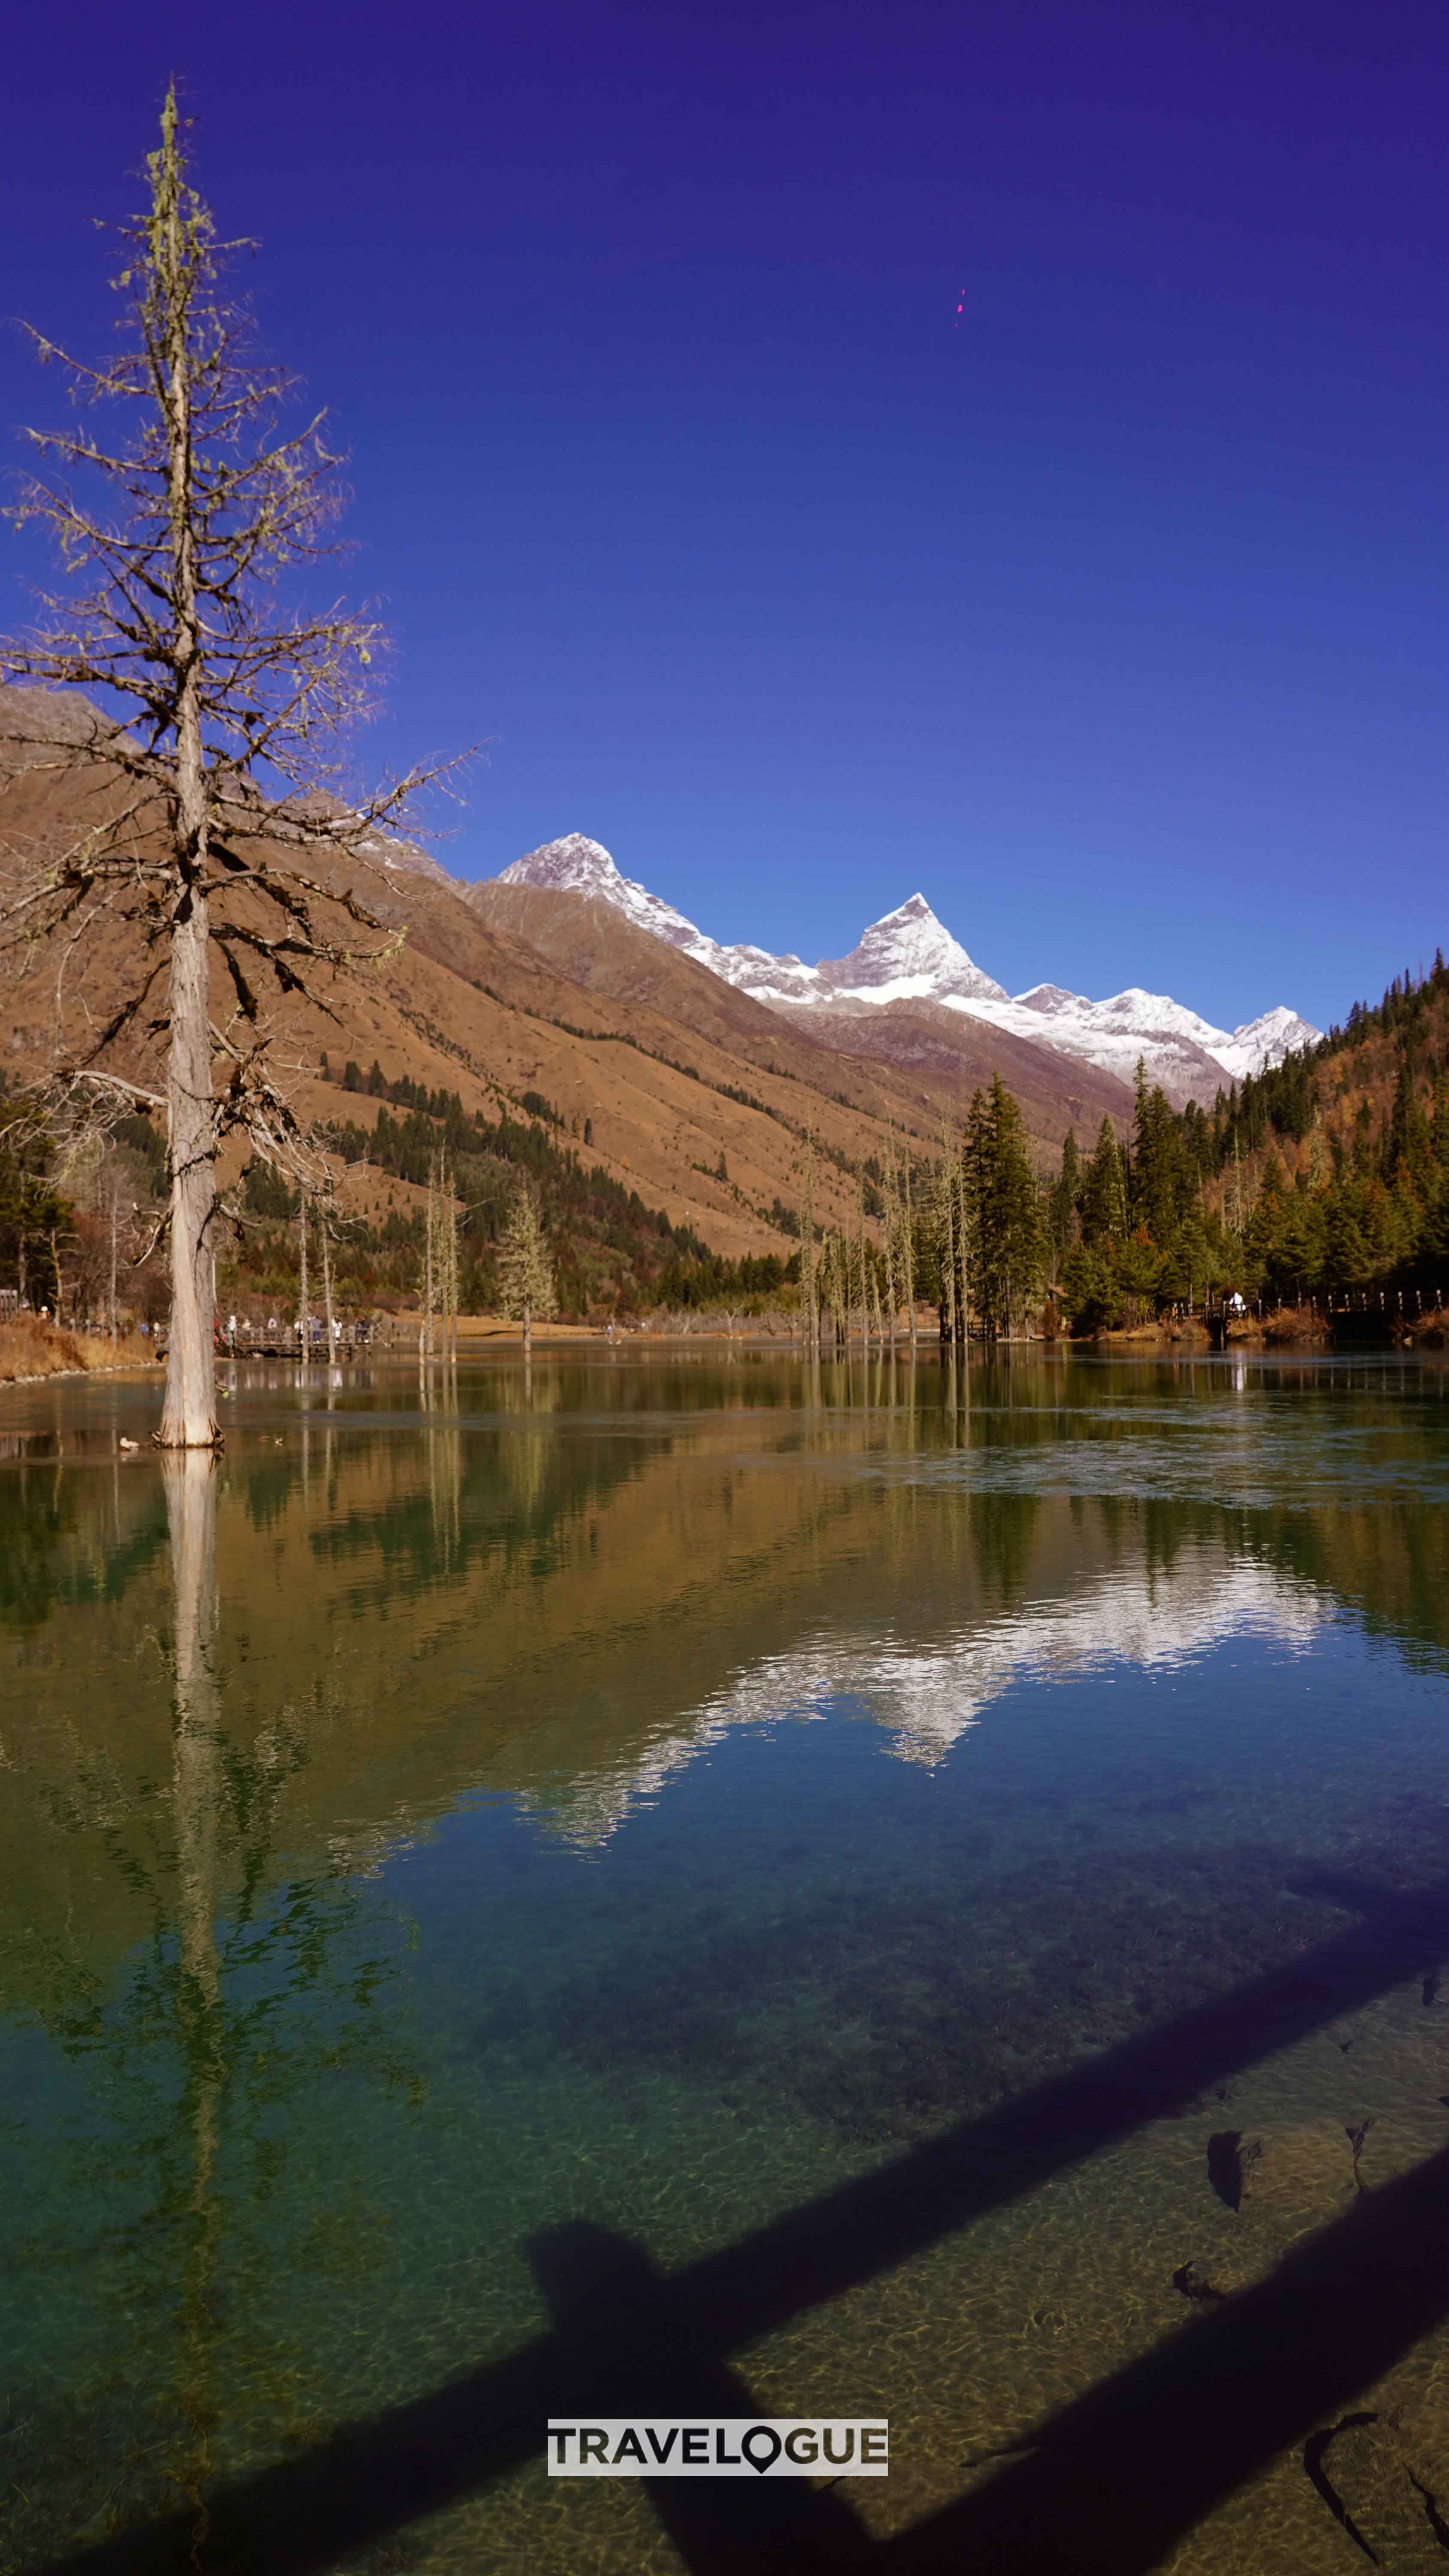 Sigulacuo is an alpine lake located in the Shuangqiao Valley of Mount Siguniang in Sichuan Province. /CGTN